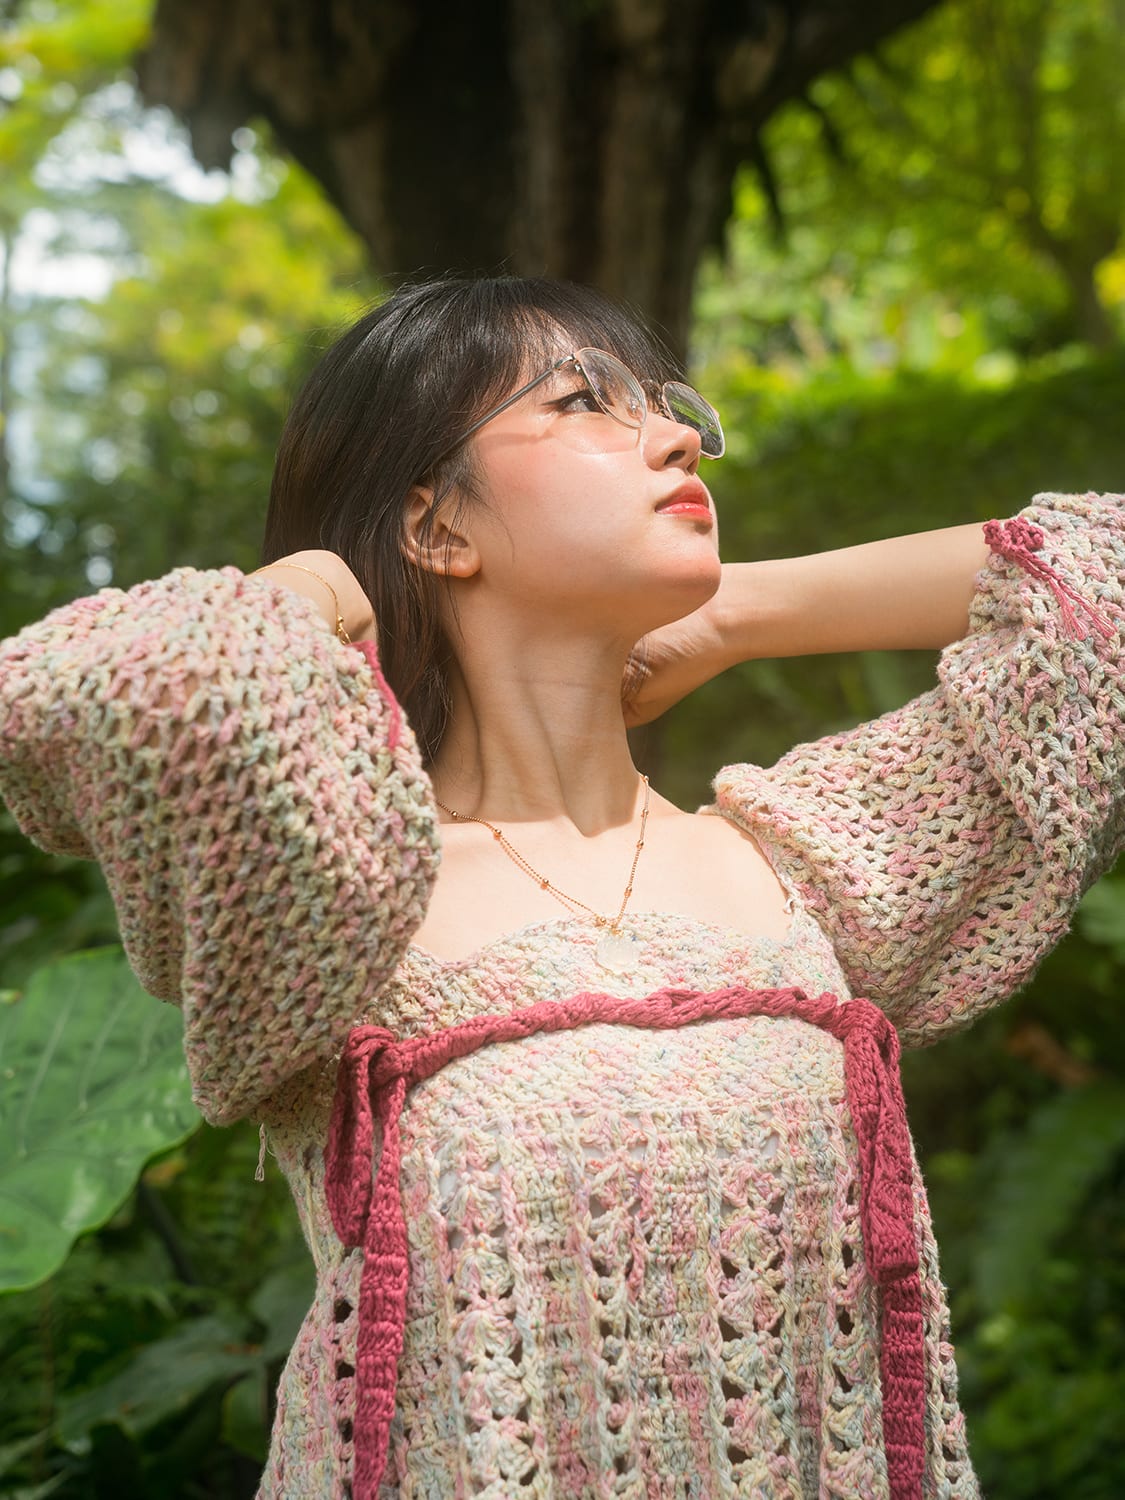 Clothes made by crochet: What slow fashion and slow living are